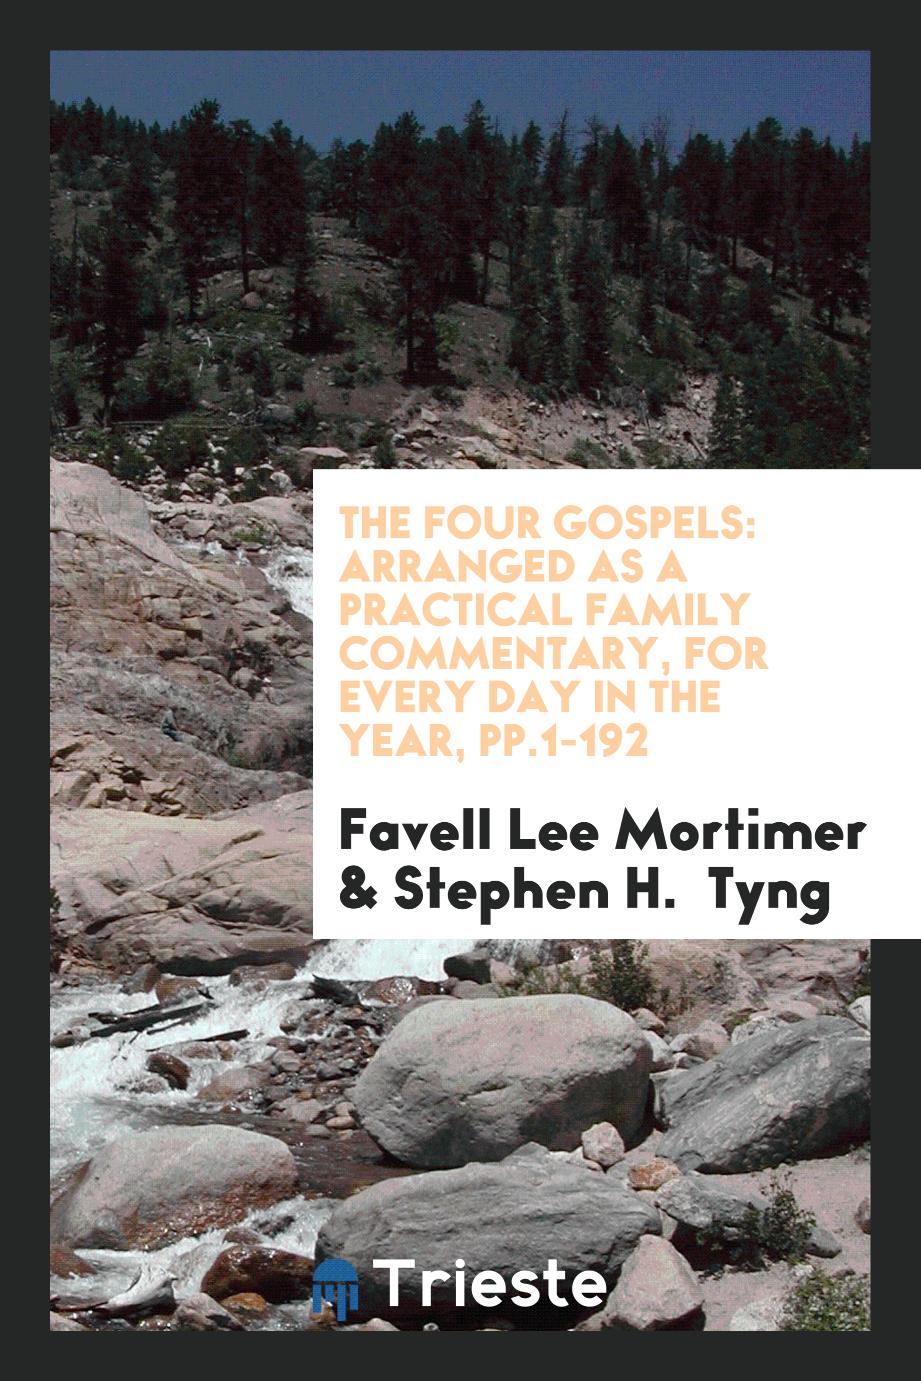 The Four Gospels: Arranged as a Practical Family Commentary, for Every Day in the Year, pp.1-192